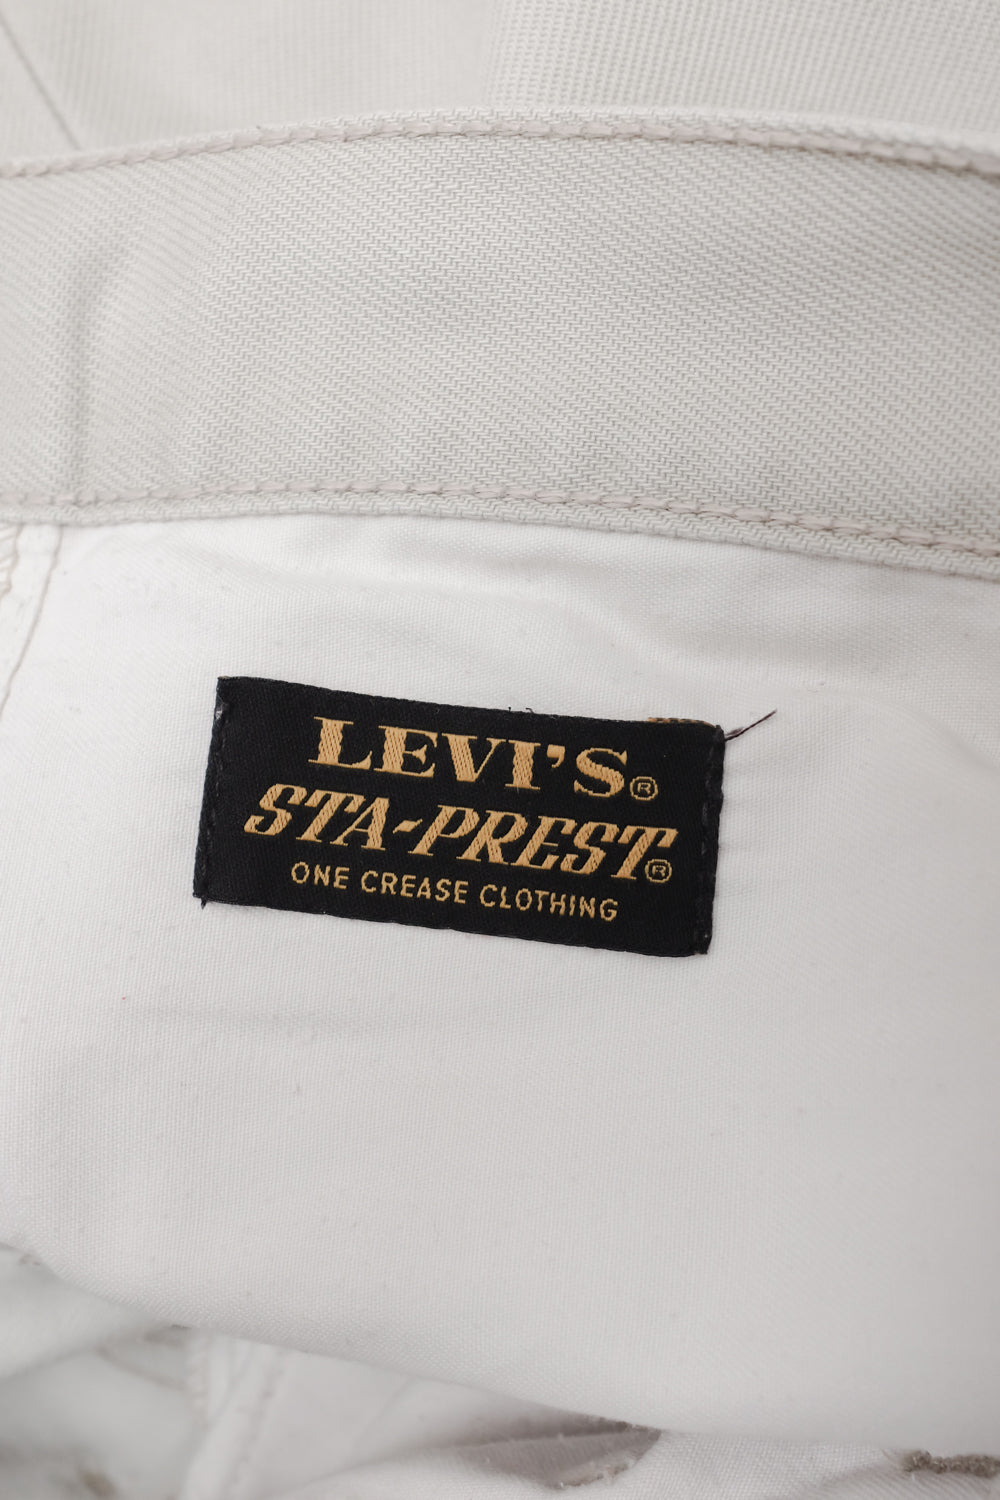 LEVIS PLEATED FLARED BEIGE VINTAGE JEANS